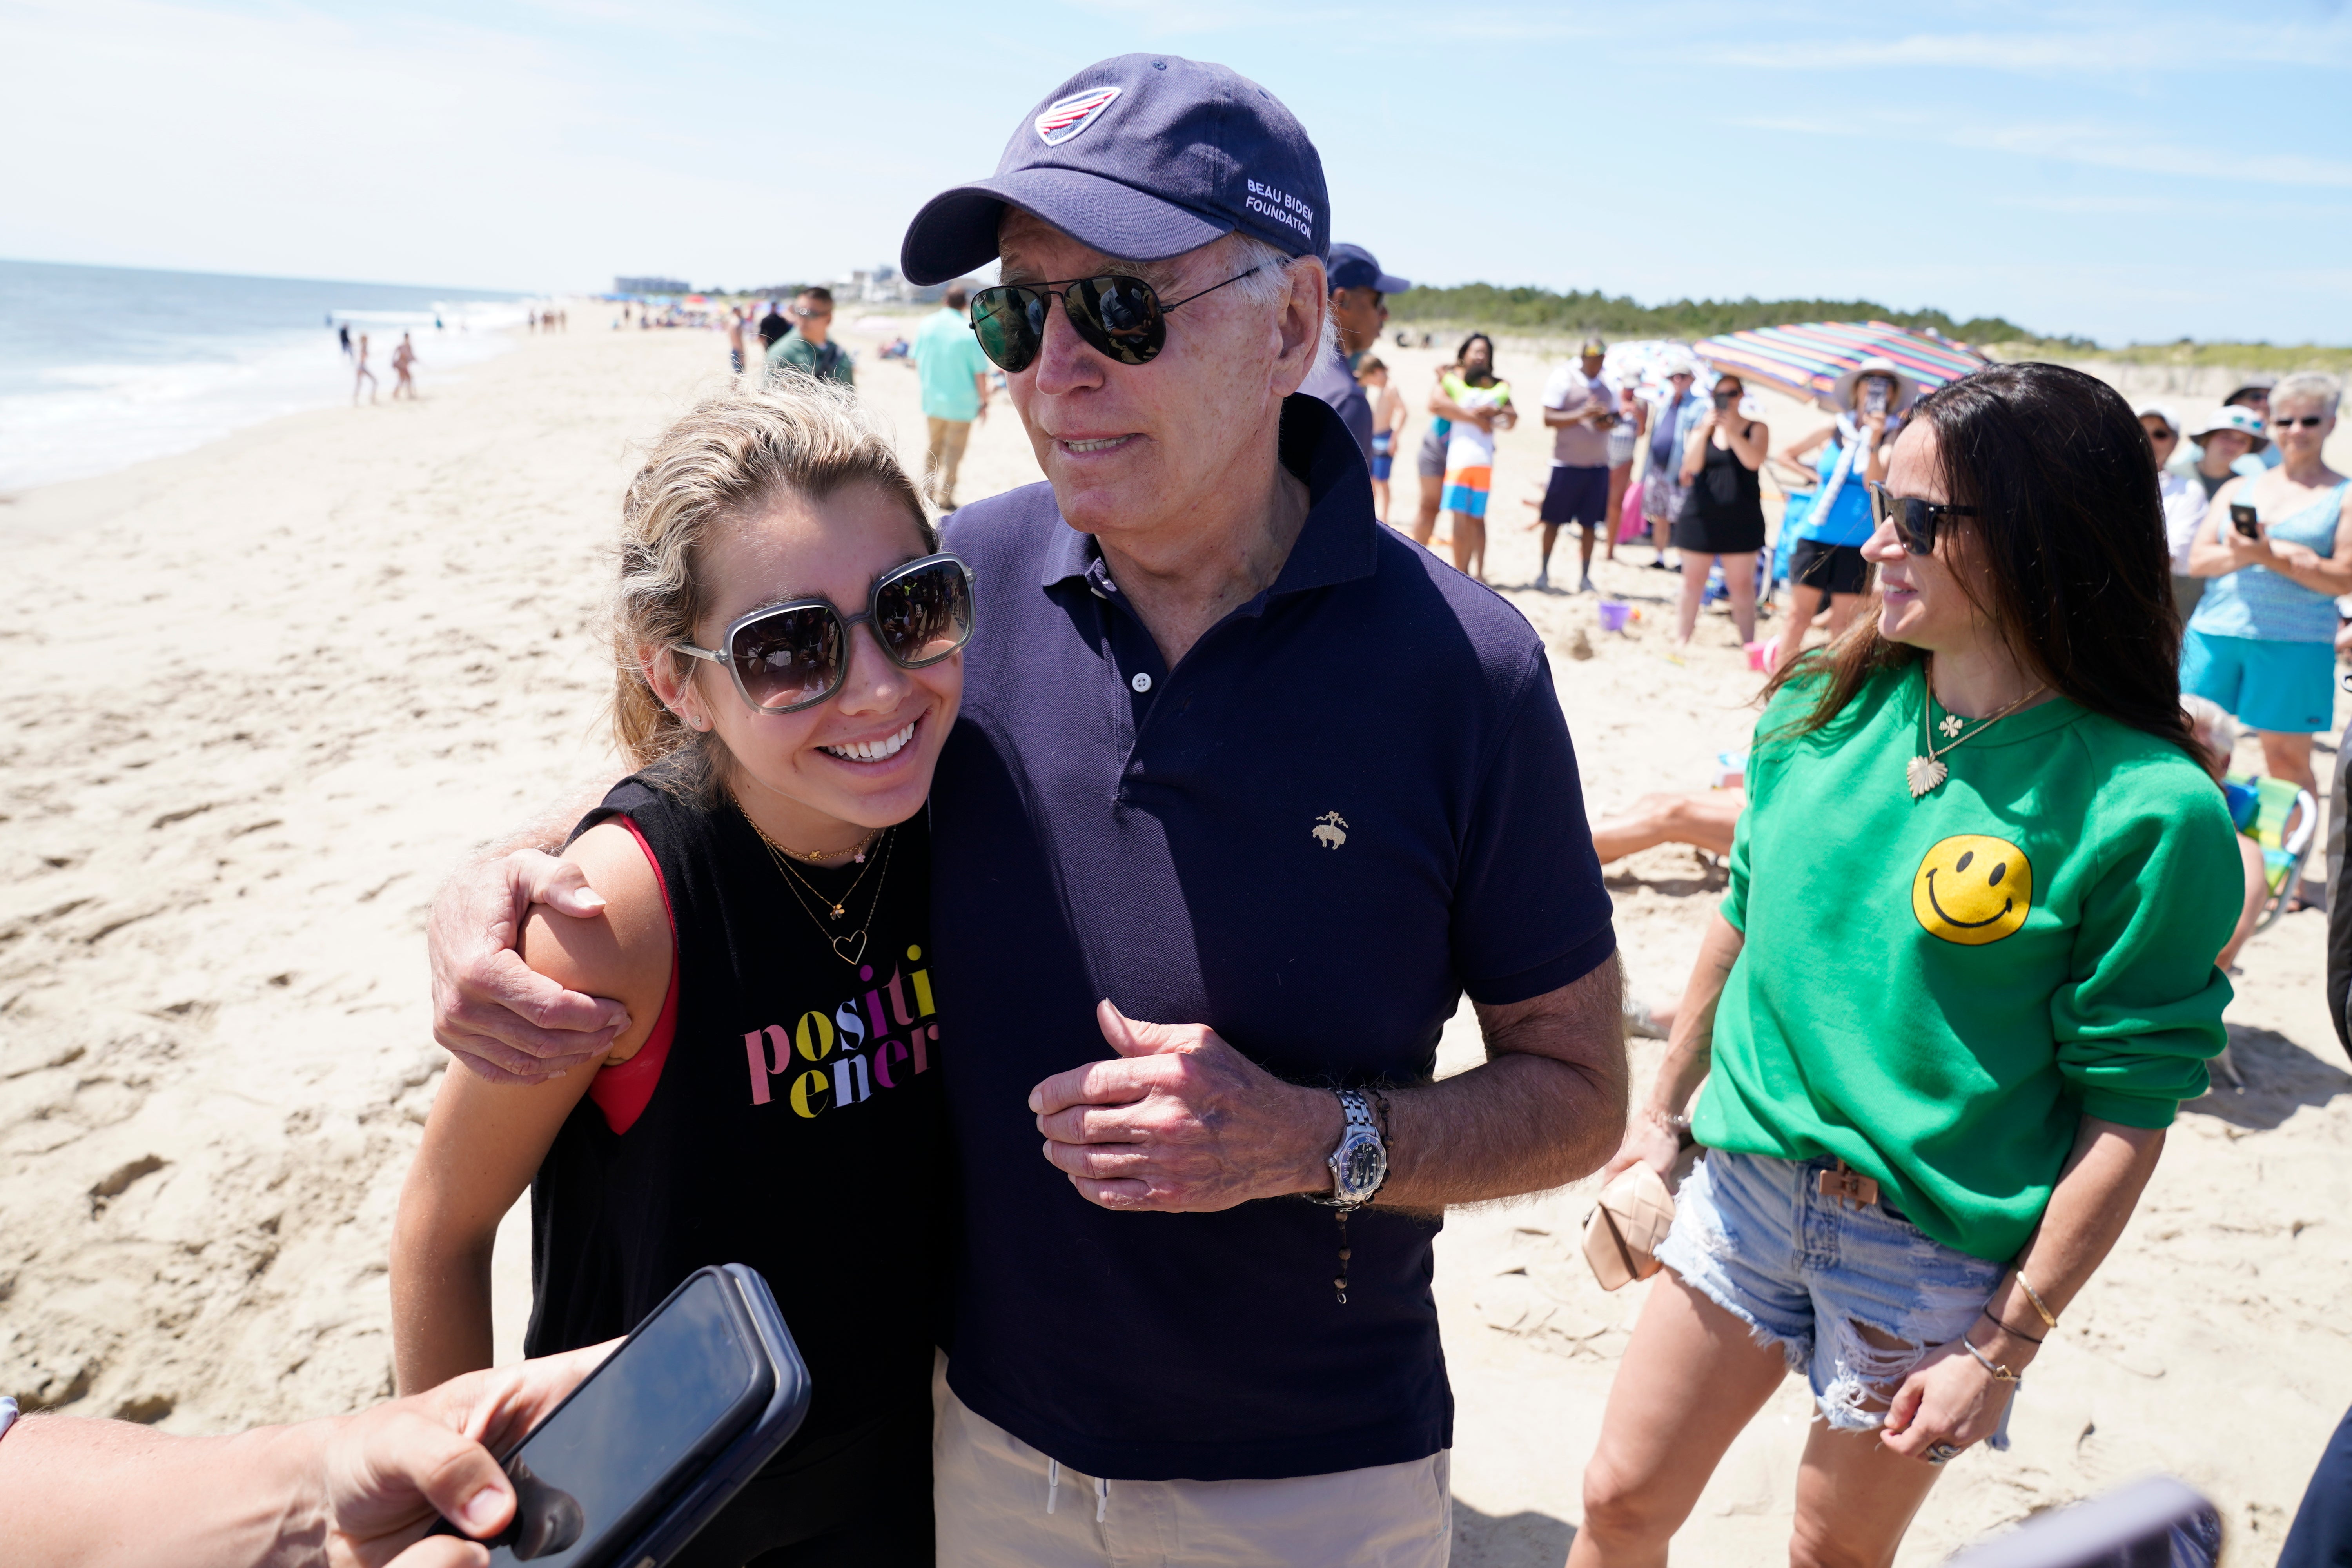 President Joe Biden talks to the media after walking on the beach with his granddaughter Natalie Biden (left) and his daughter Ashley Biden (right) on 20 June 2022 at Rehoboth Beach, Delaware